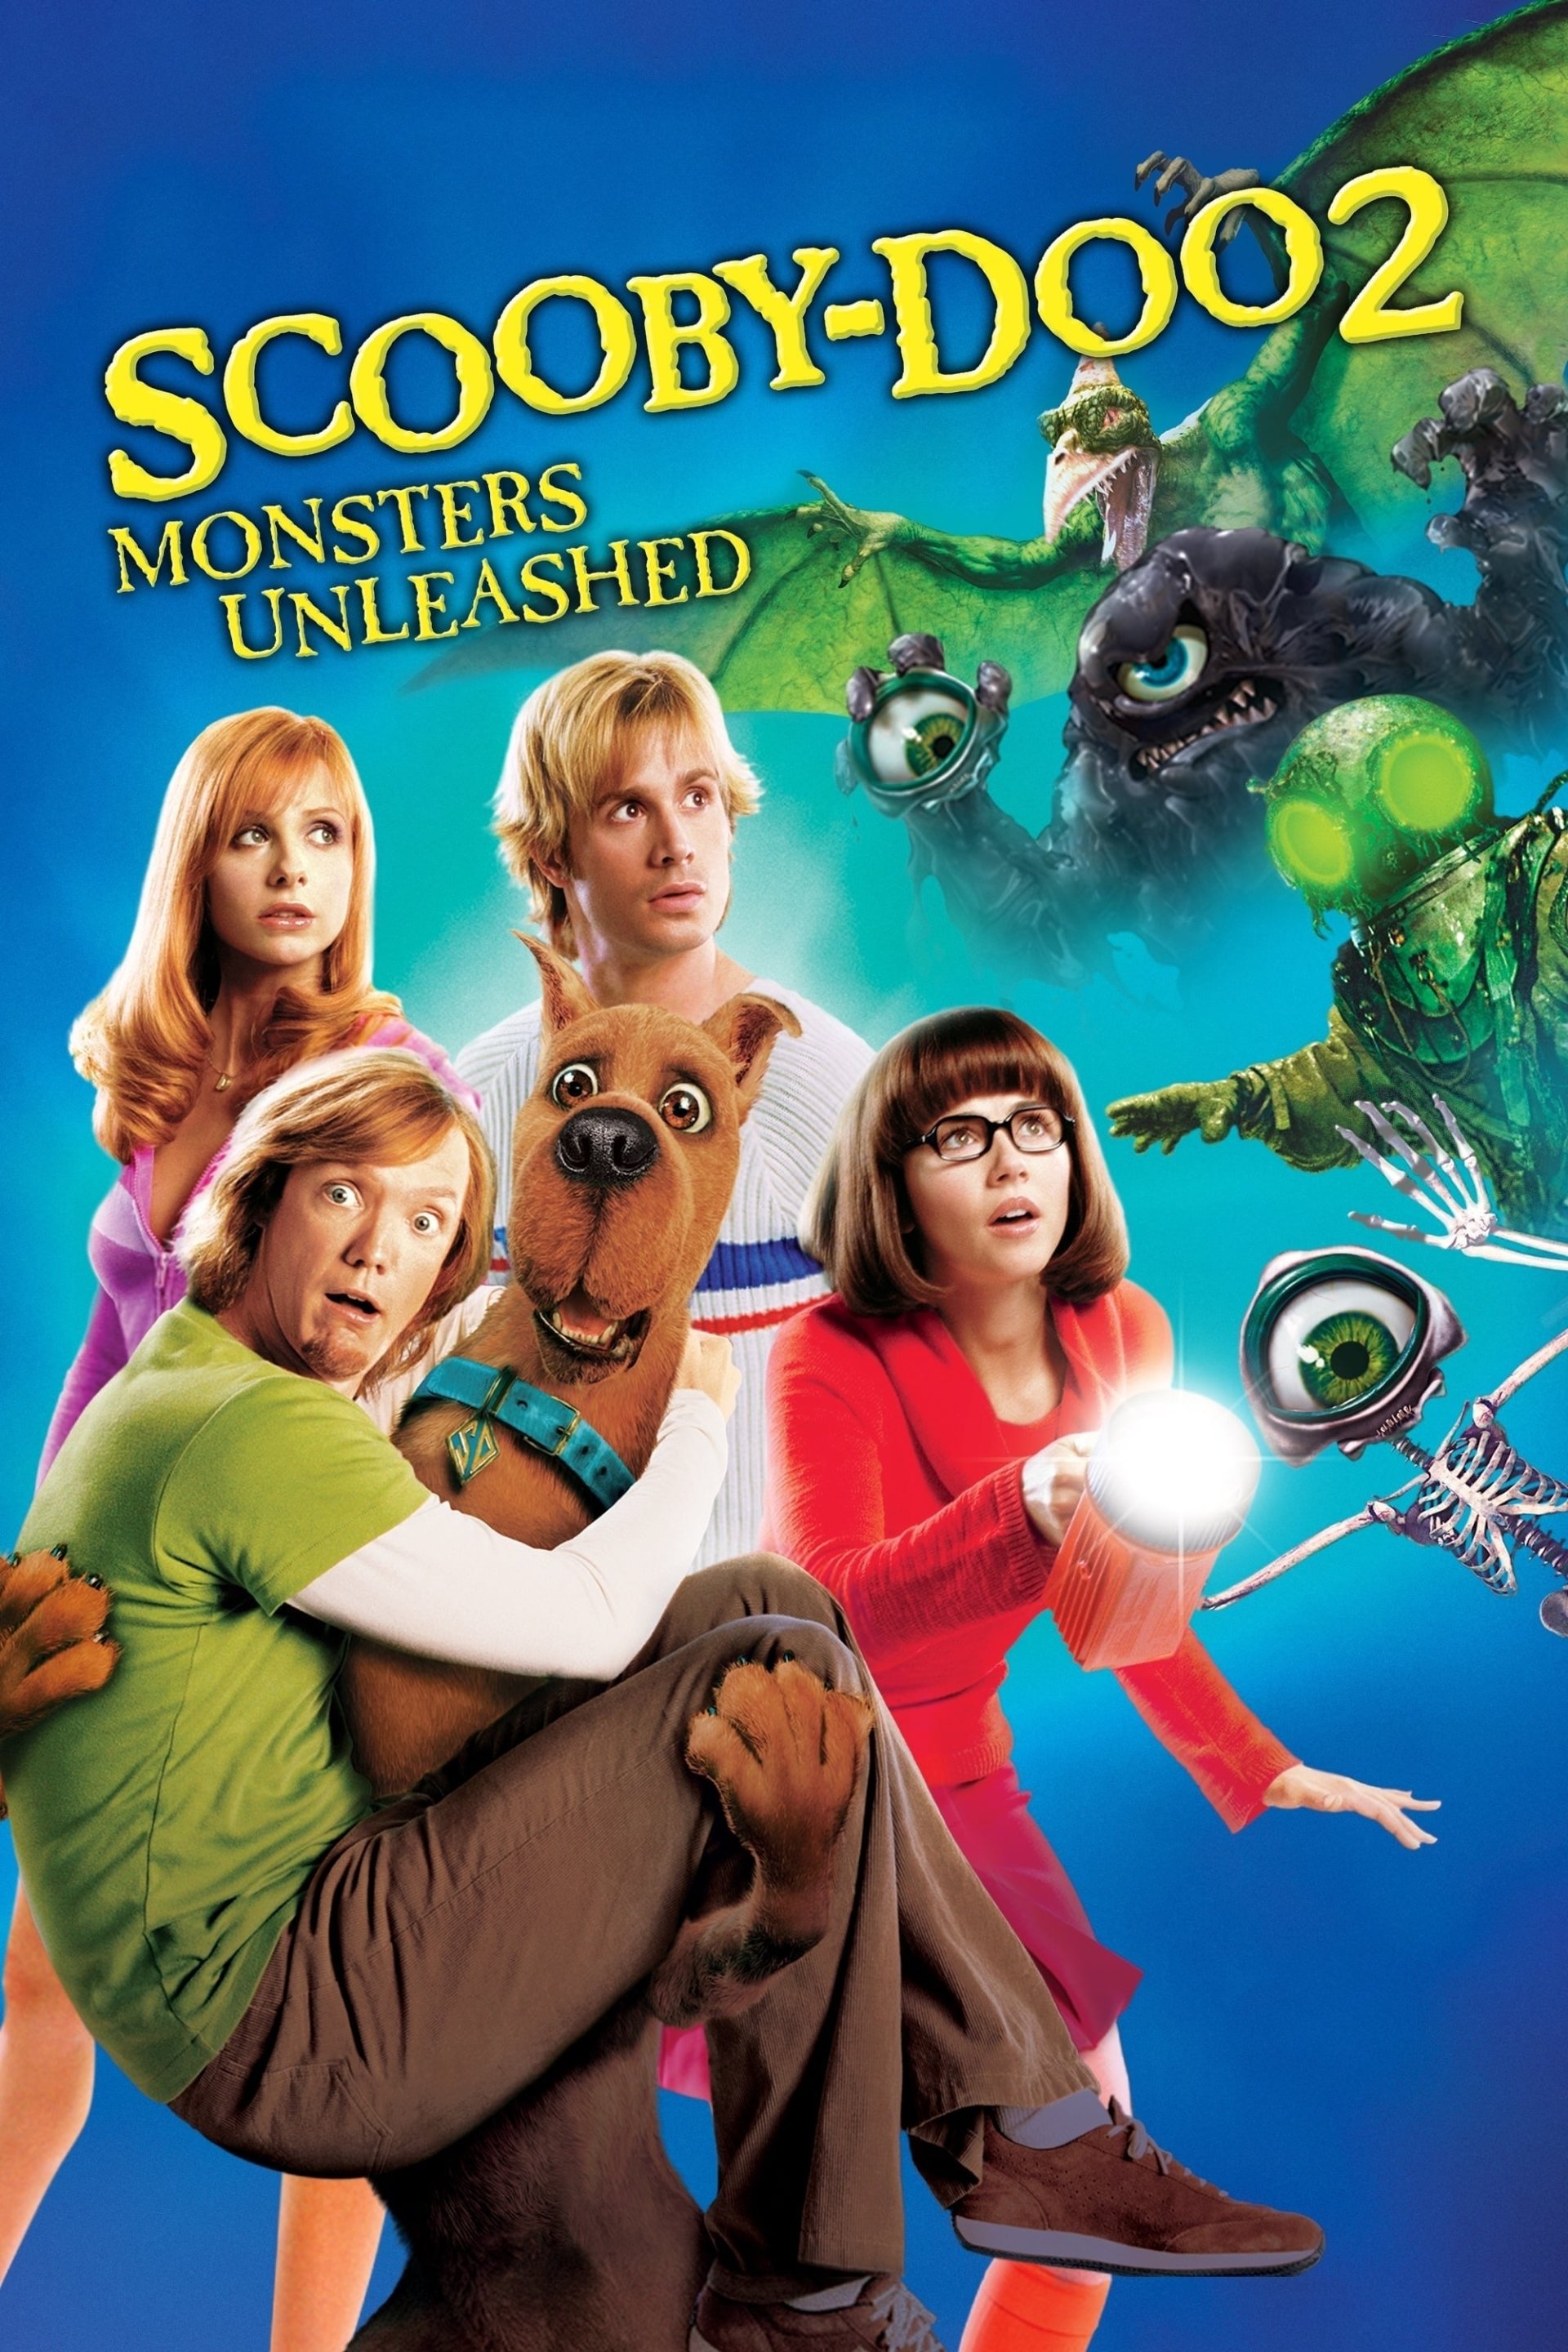 Scooby-Doo 2: Monsters Unleashed Movie Poster - ID: 363120 - Image Abyss